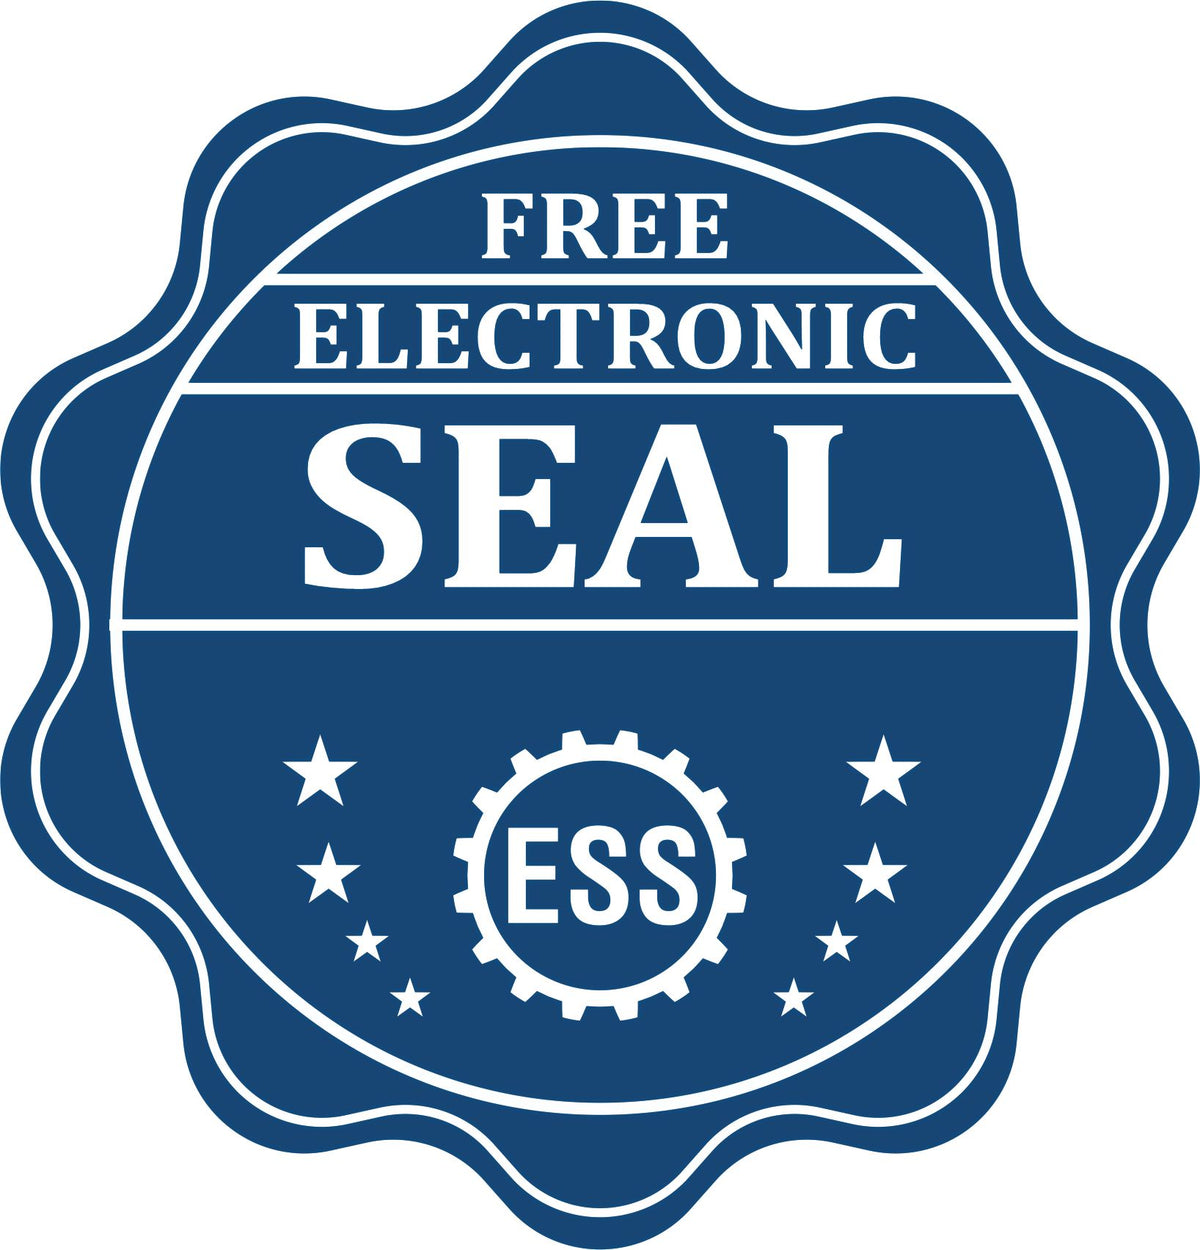 A badge showing a free electronic seal for the Connecticut Desk Surveyor Seal Embosser with stars and the ESS gear on the emblem.